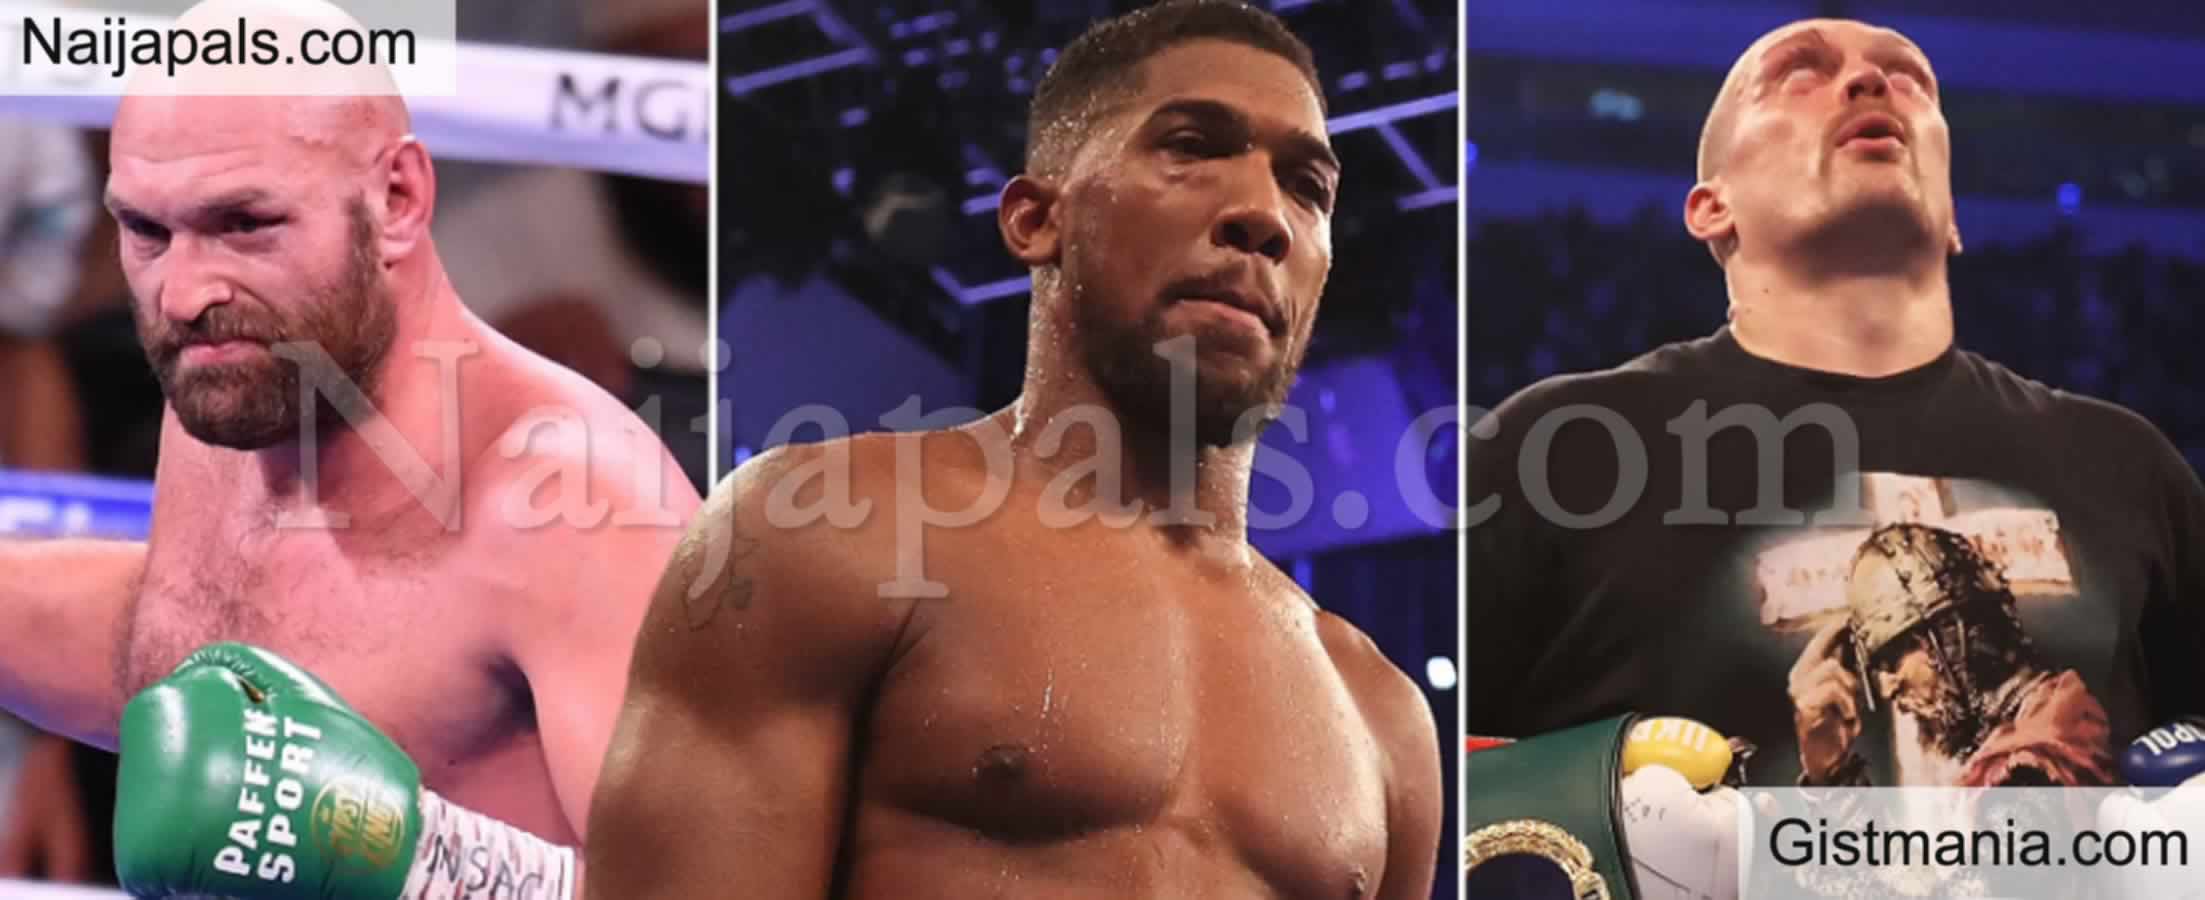 <img alt='.' class='lazyload' data-src='https://img.gistmania.com/emot/comment.gif' /> <b>Anthony Joshua To Receive $15M To Stand Aside And Let Oleksandr Usyk Fight Tyson Fury </b>